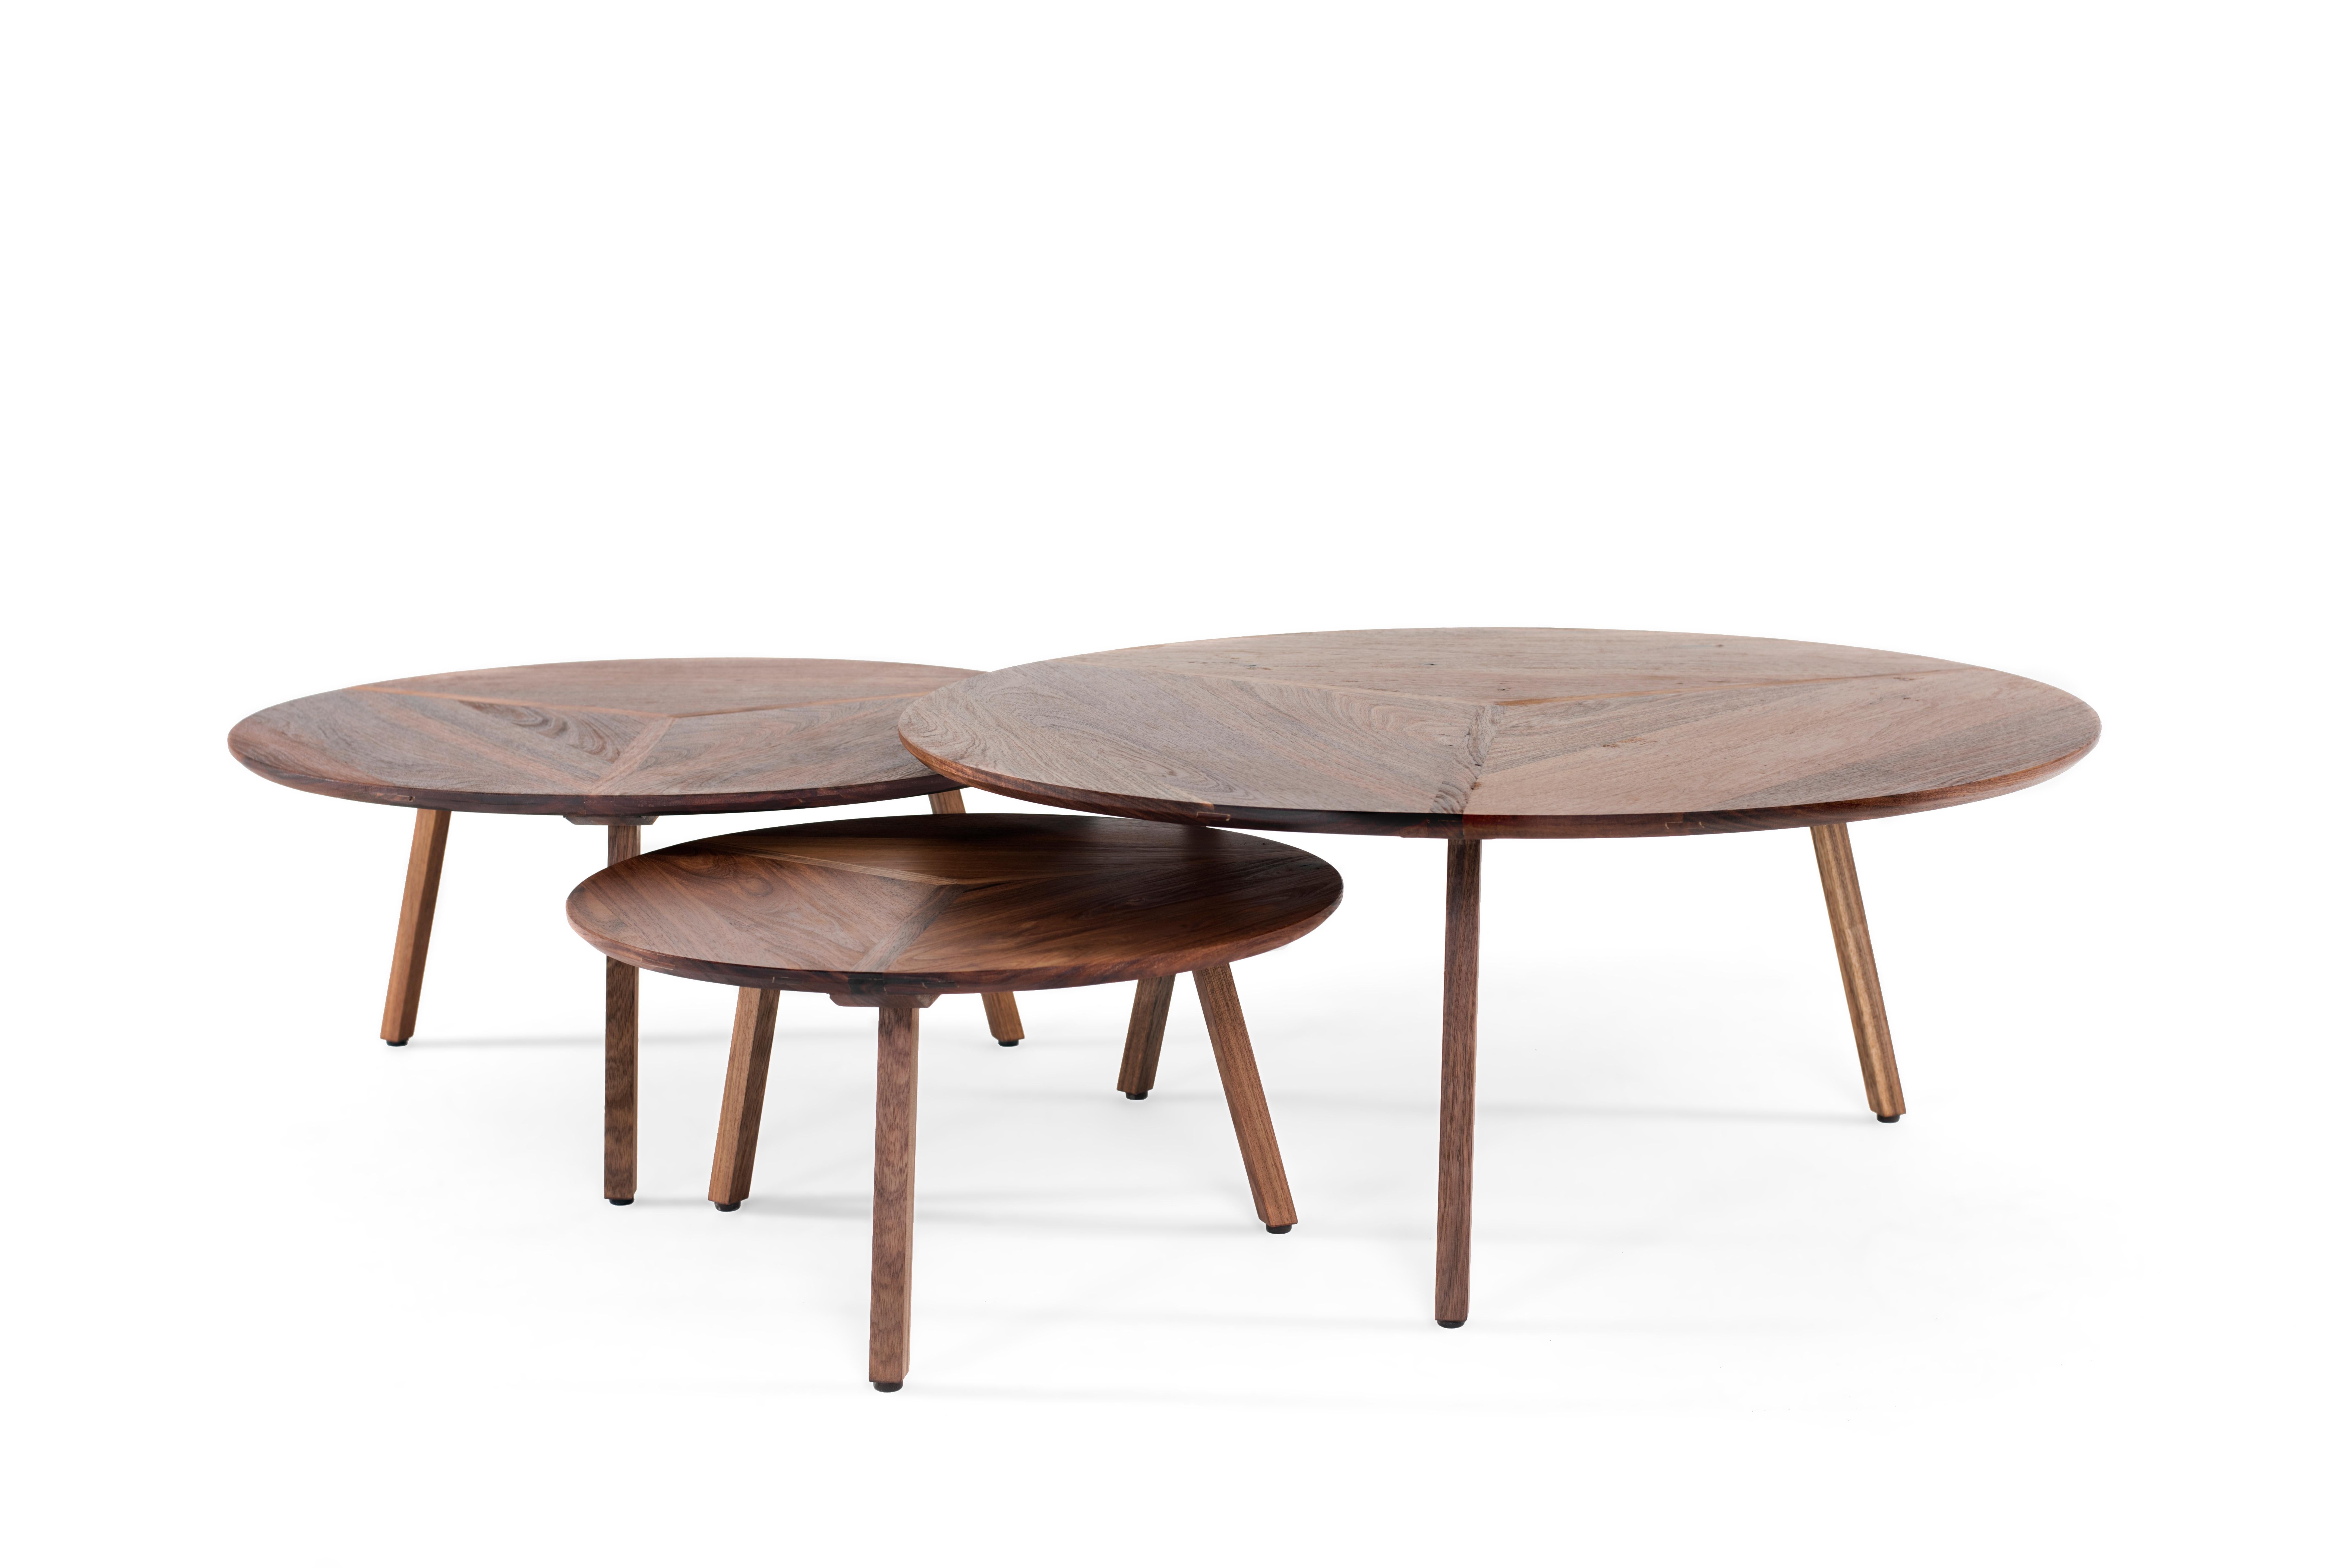 Hand-Crafted Mesas Circuito, Mexican Contemporary Set of Coffee Tables by Emiliano Molina For Sale